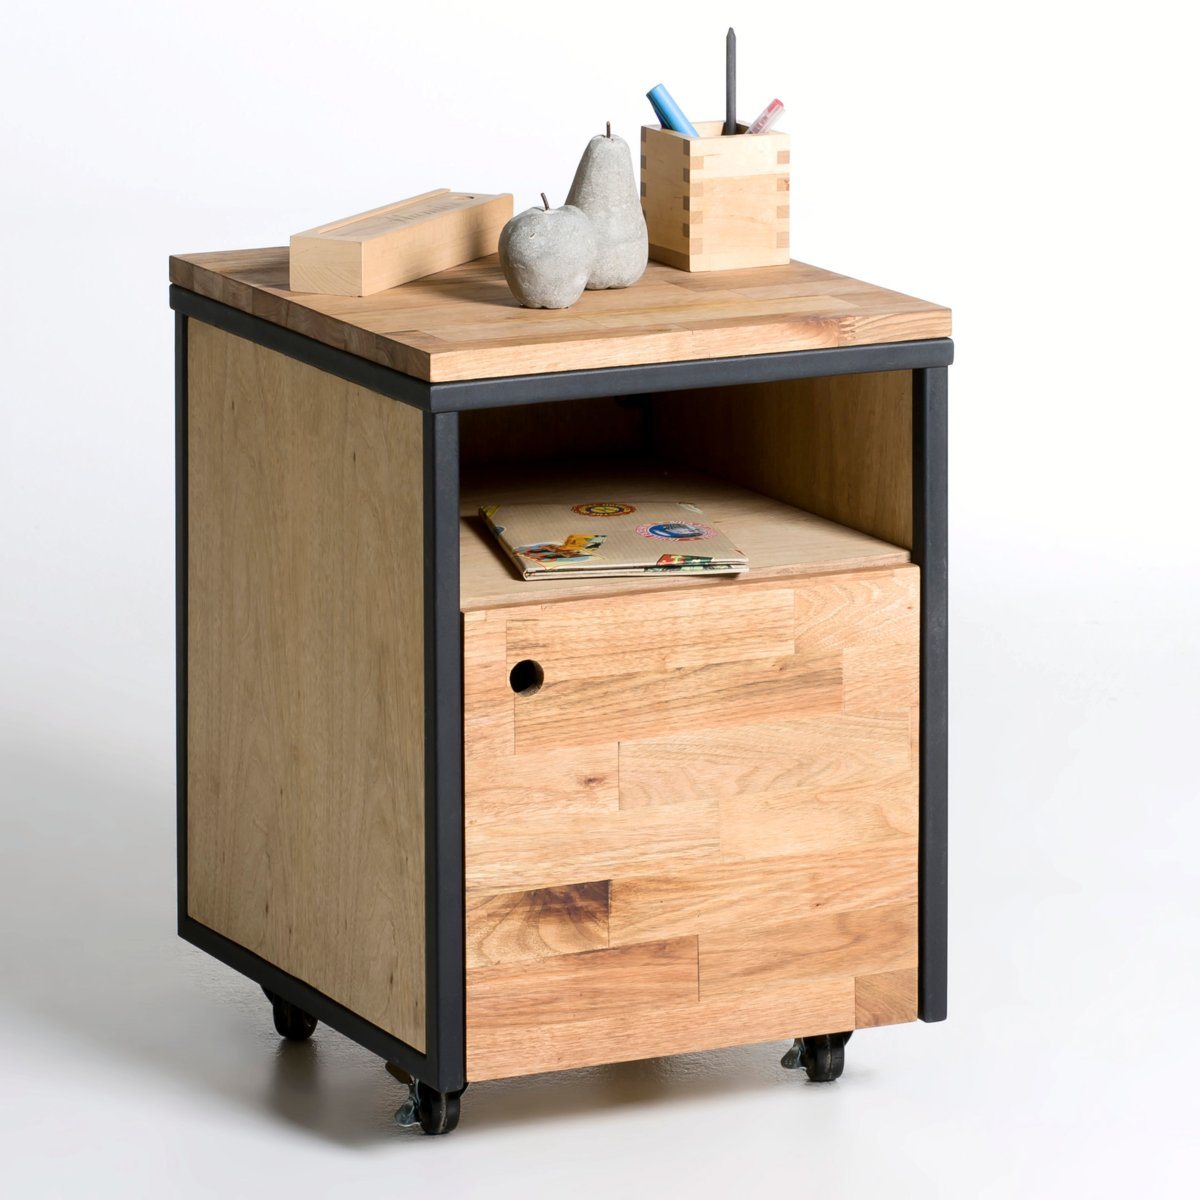 Image of Hiba Oak and Metal Cabinet on Casters